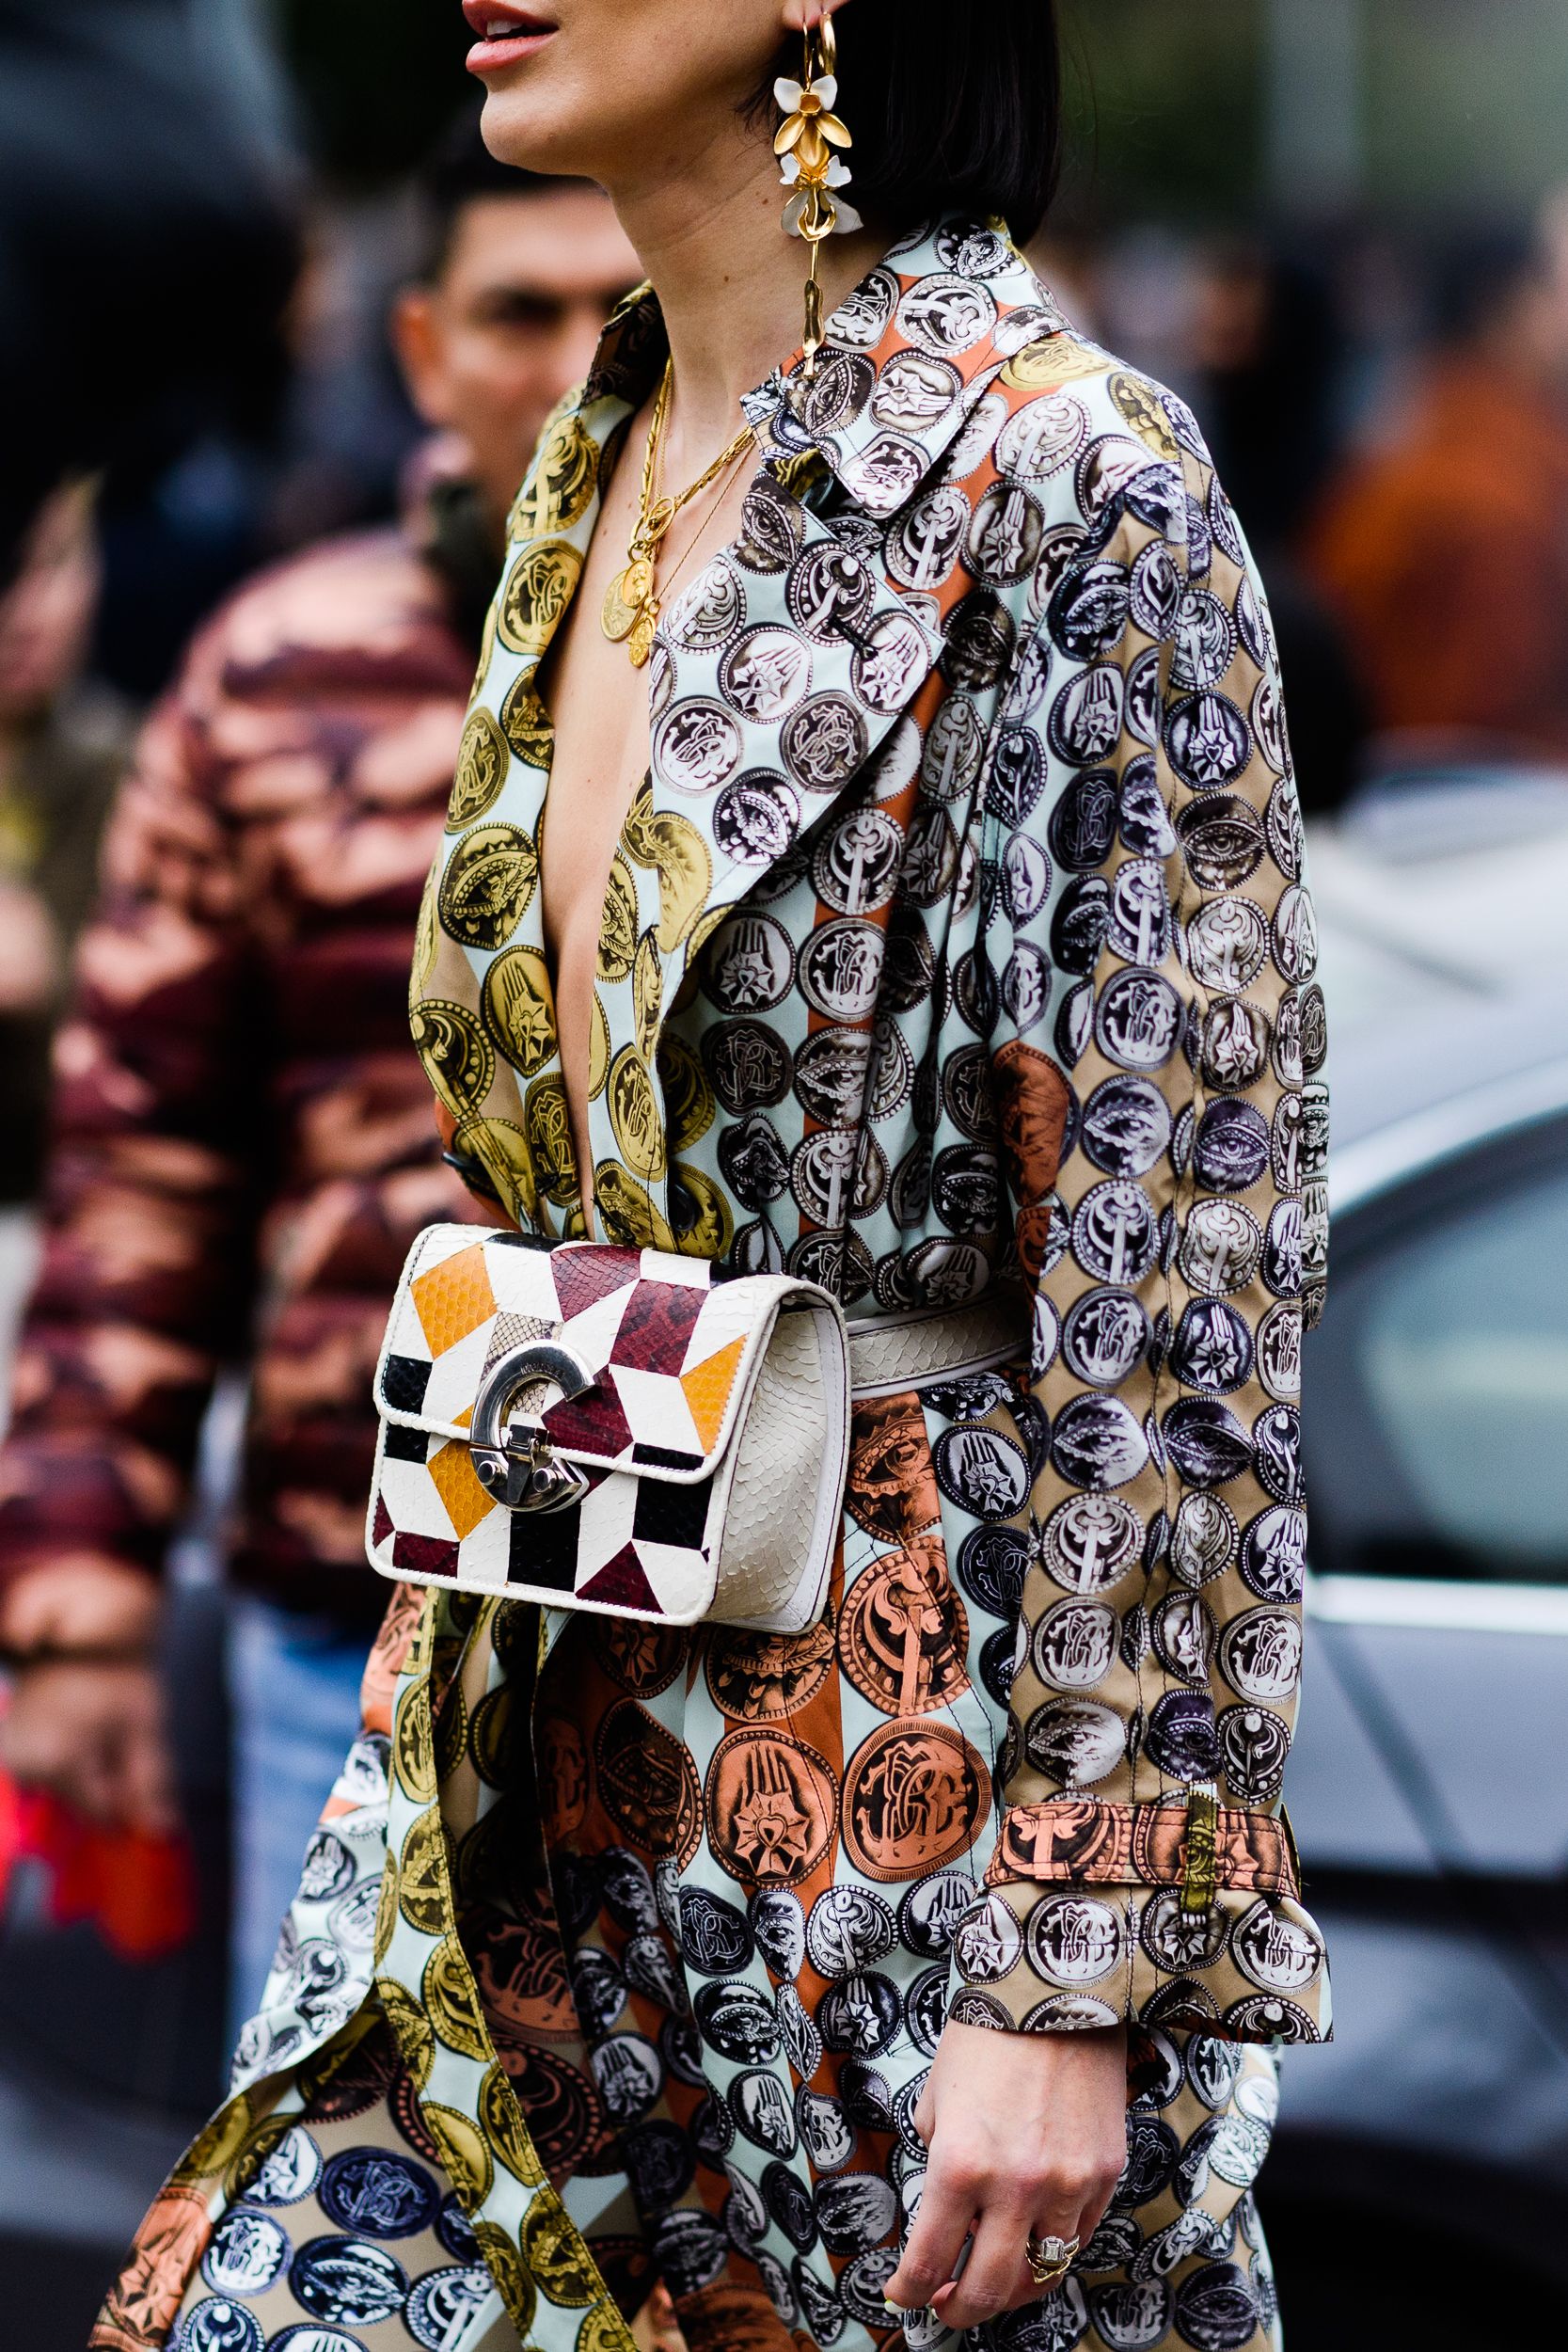 Best Street Style From Milan Fashion Week Fall 2019 and My Love Affair -  FunkyForty